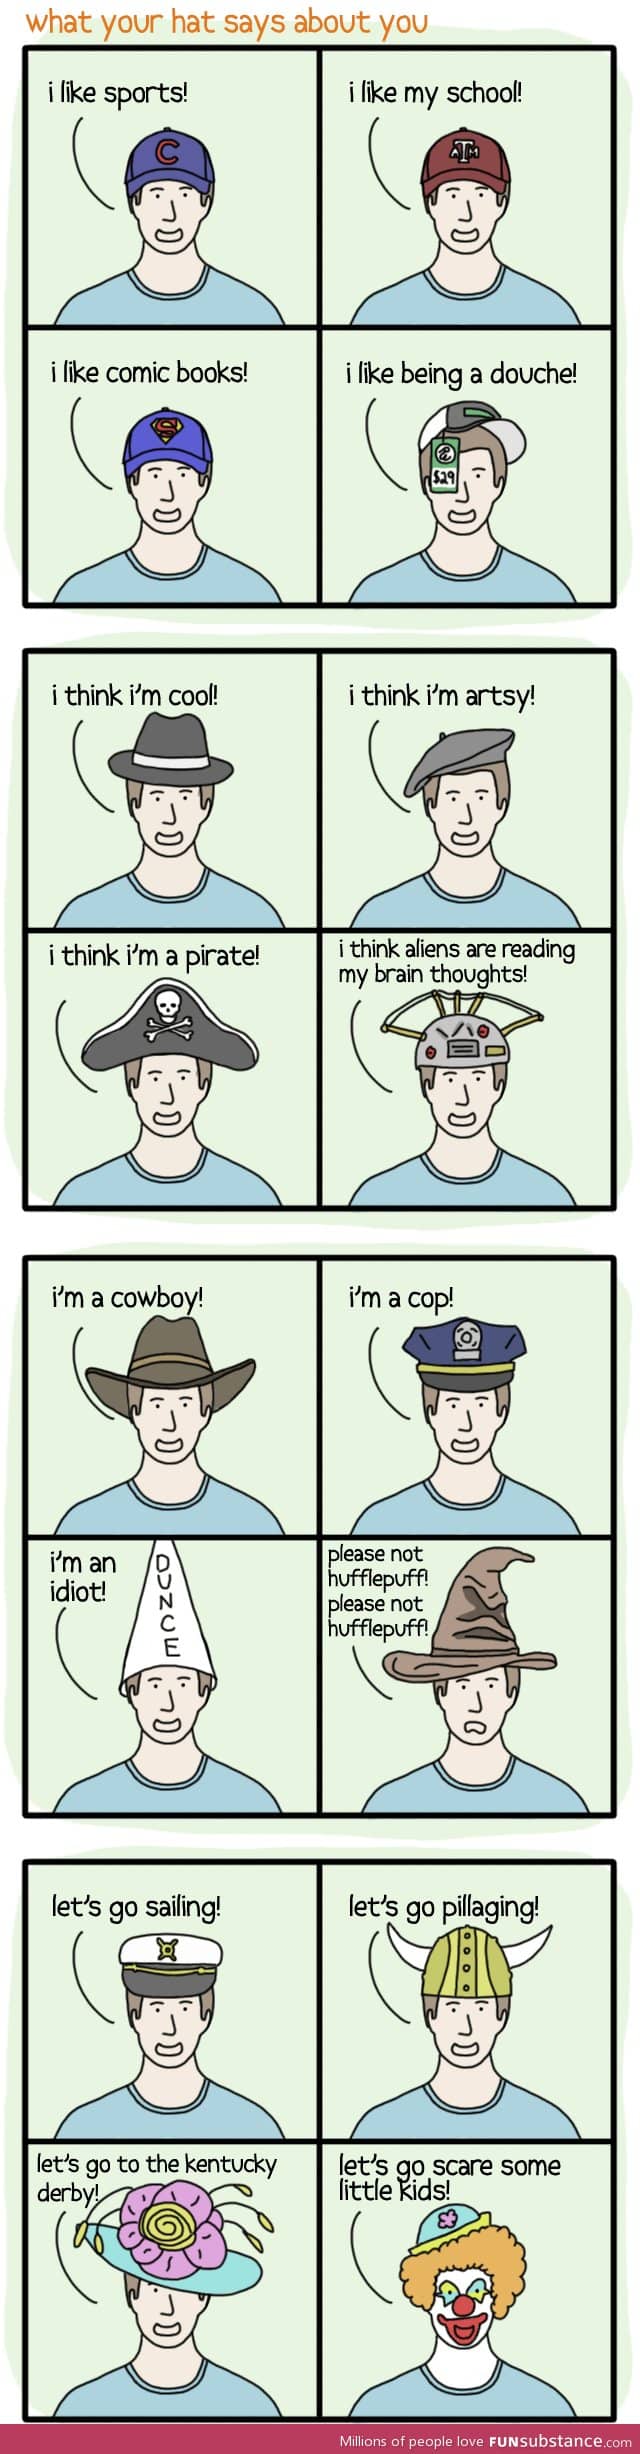 What your hat says about you